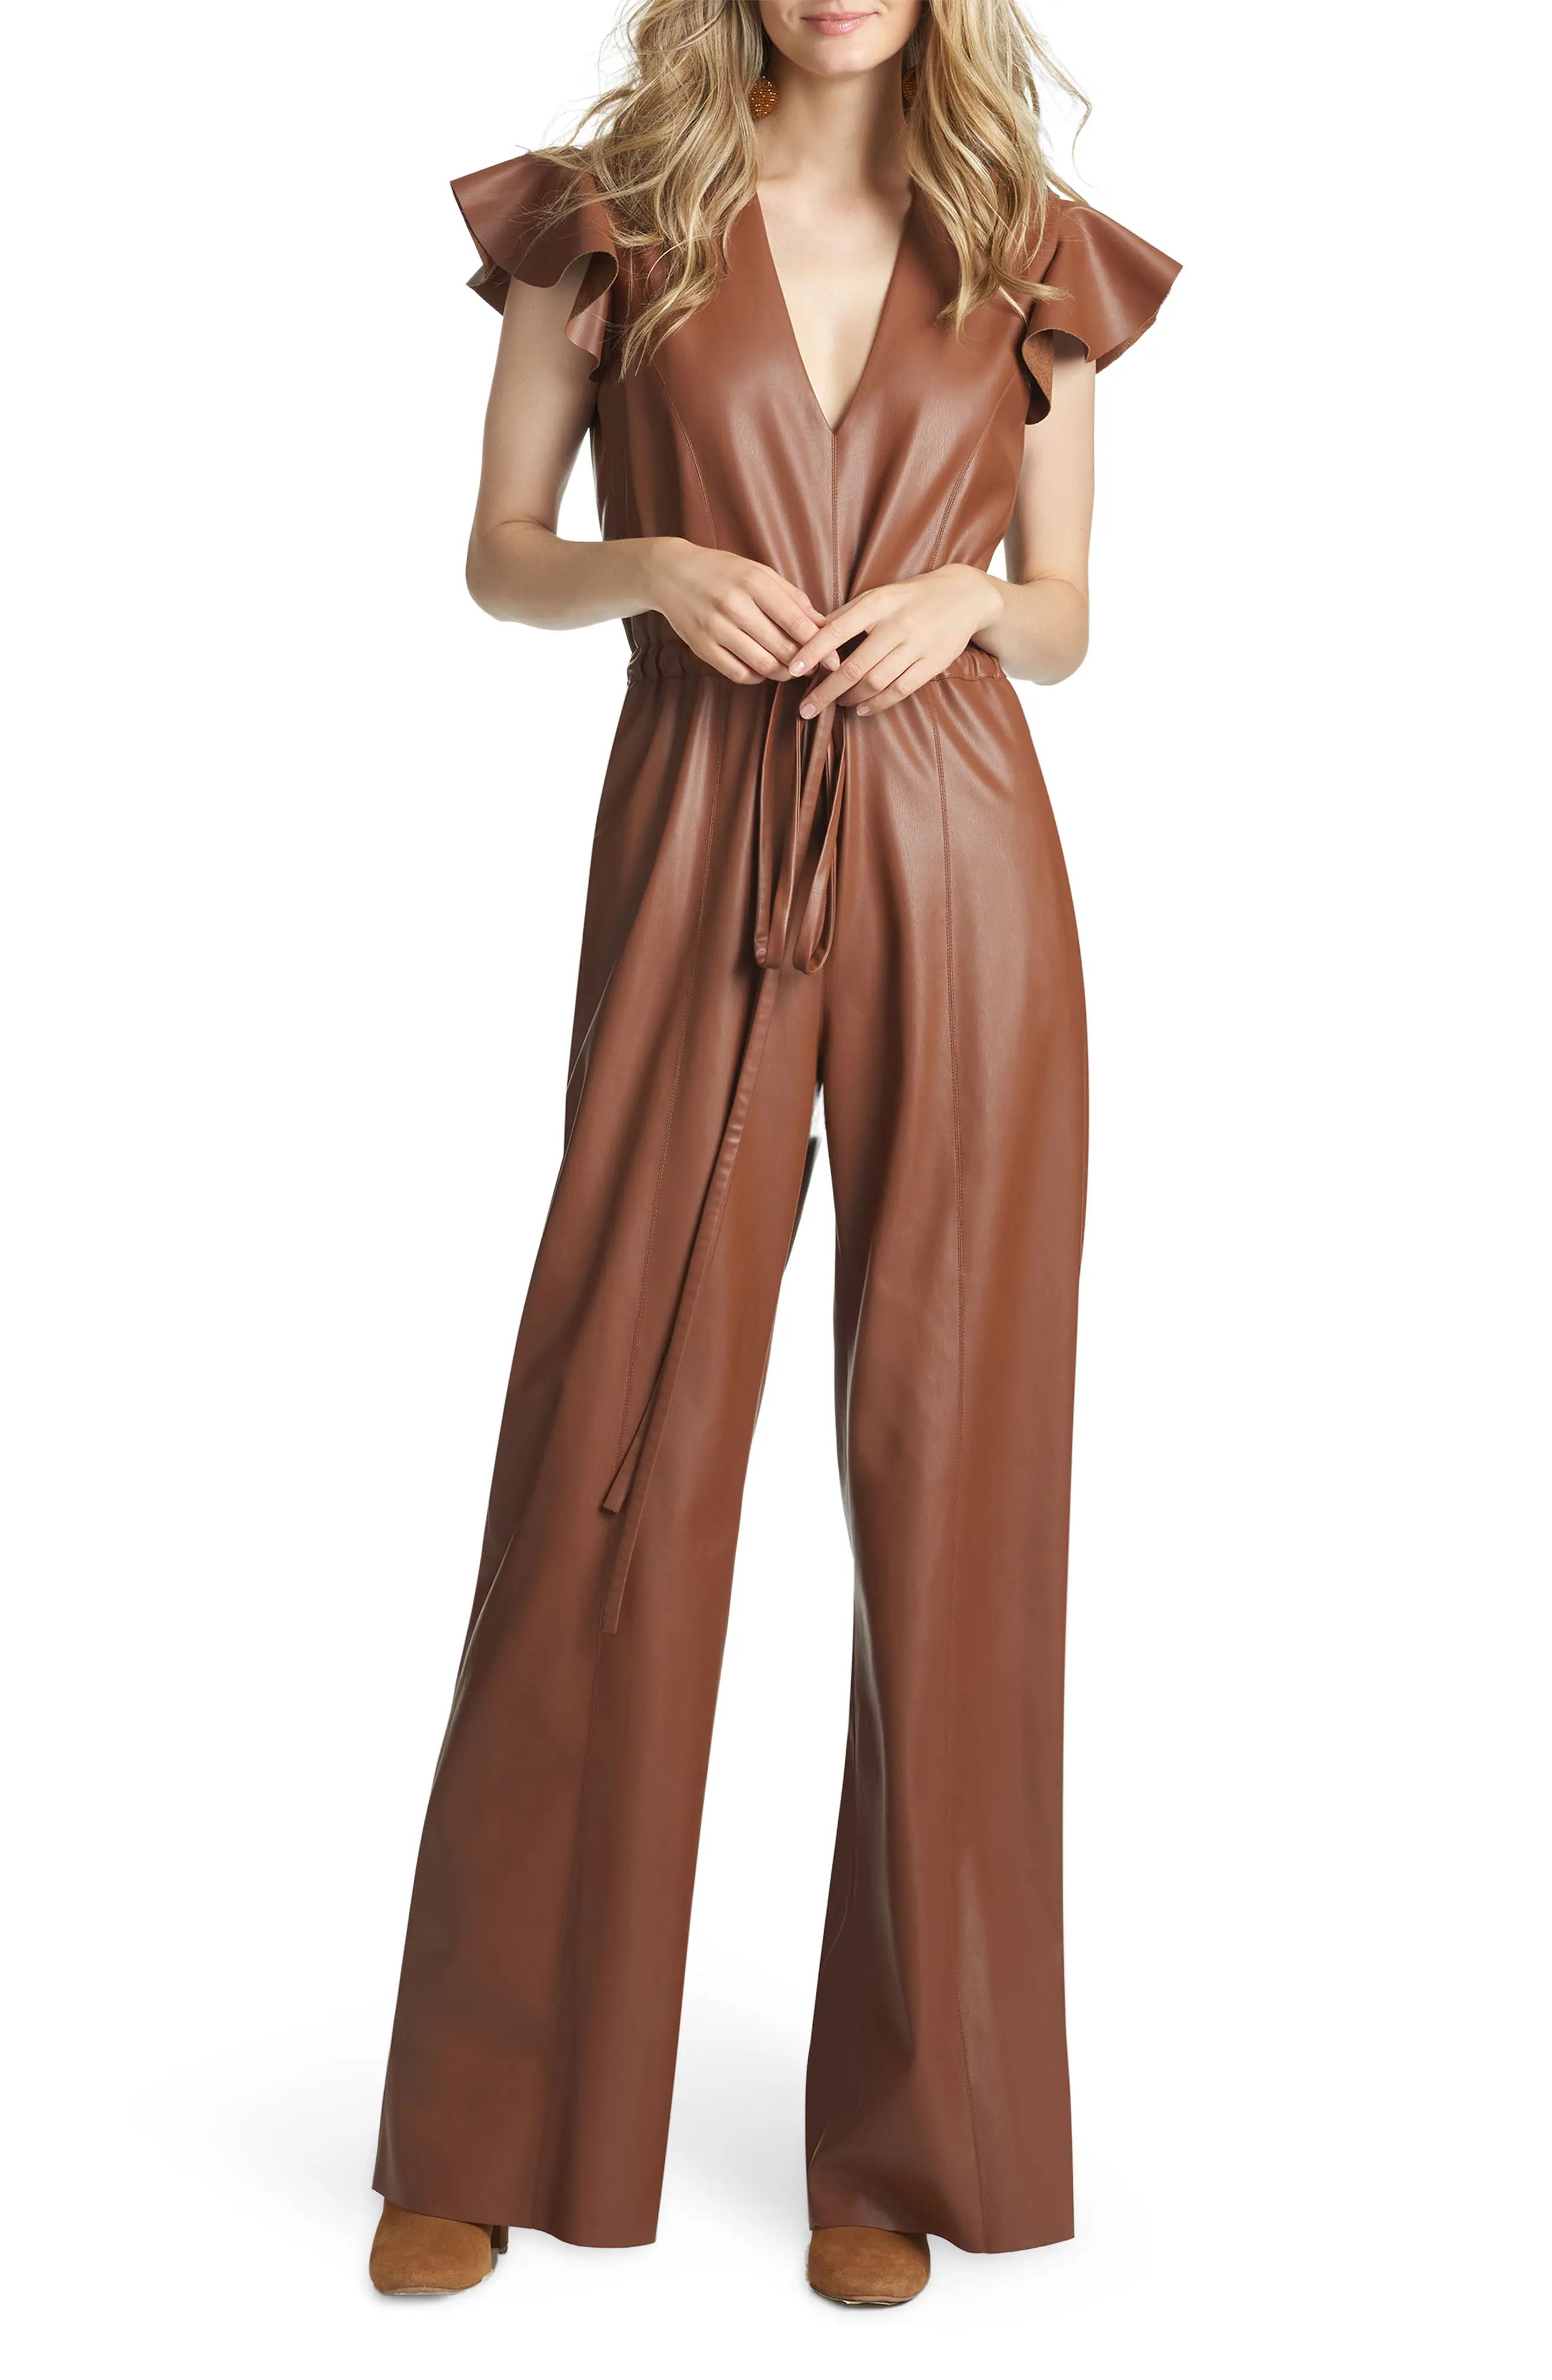 Sachin & Babi Kaydie Flounce Sleeve Faux Leather Jumpsuit, Size 6 in Cognac at Nordstrom | Nordstrom